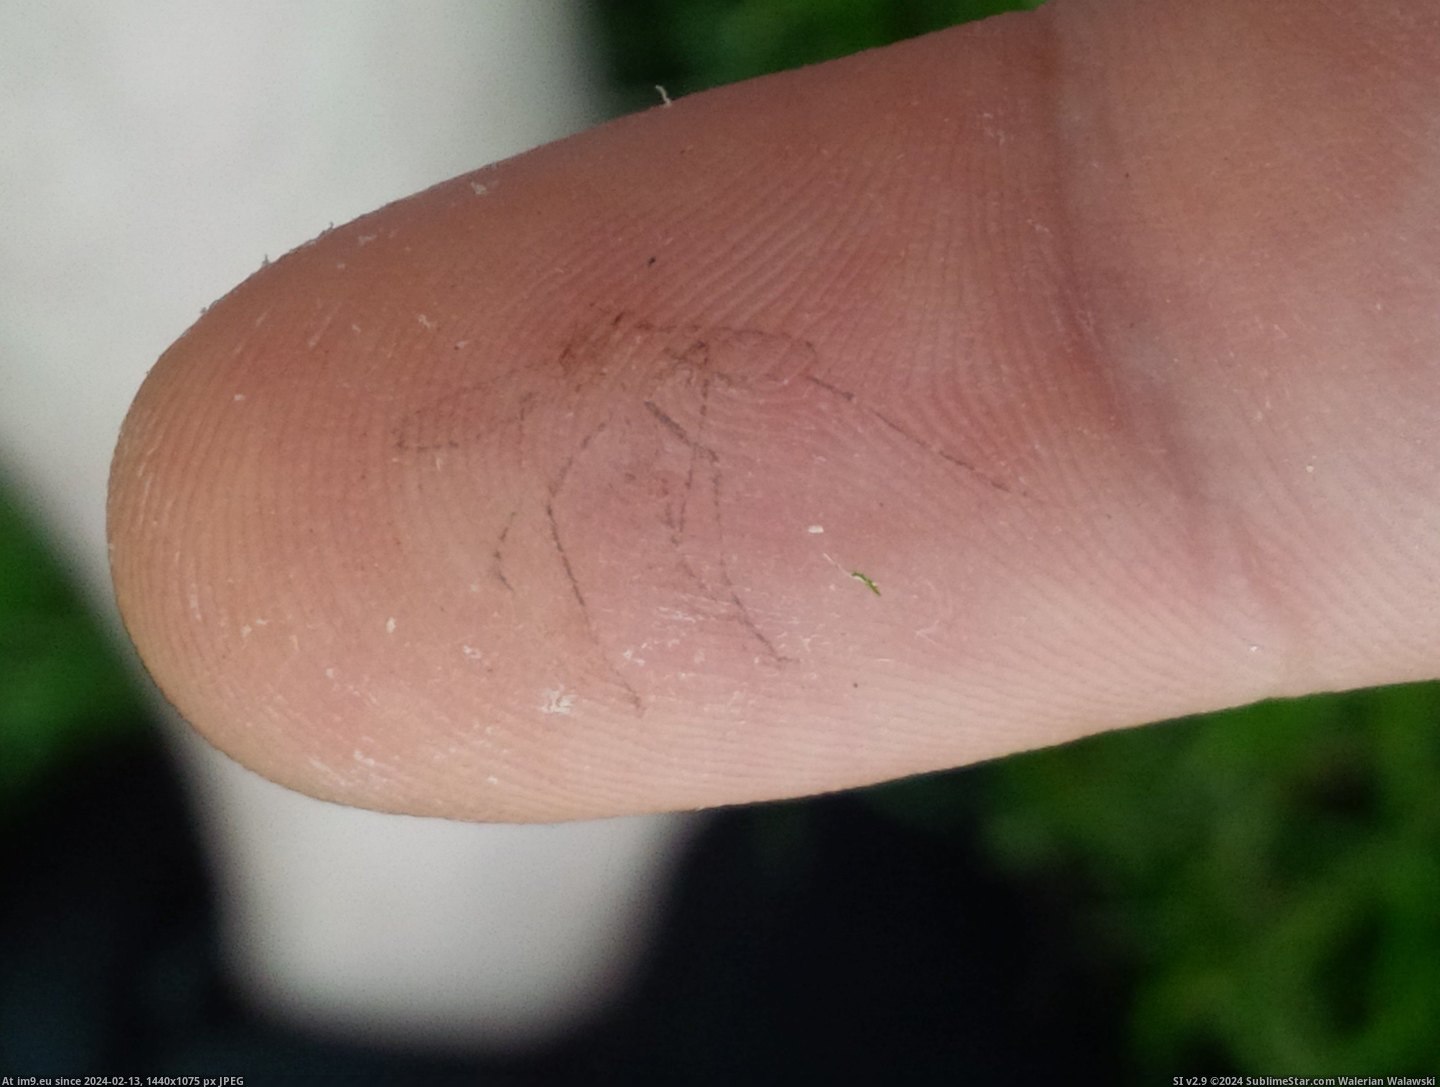 [Mildlyinteresting] Slapped a mosquito out of the air and got an imprint of its last moment on my finger (in My r/MILDLYINTERESTING favs)